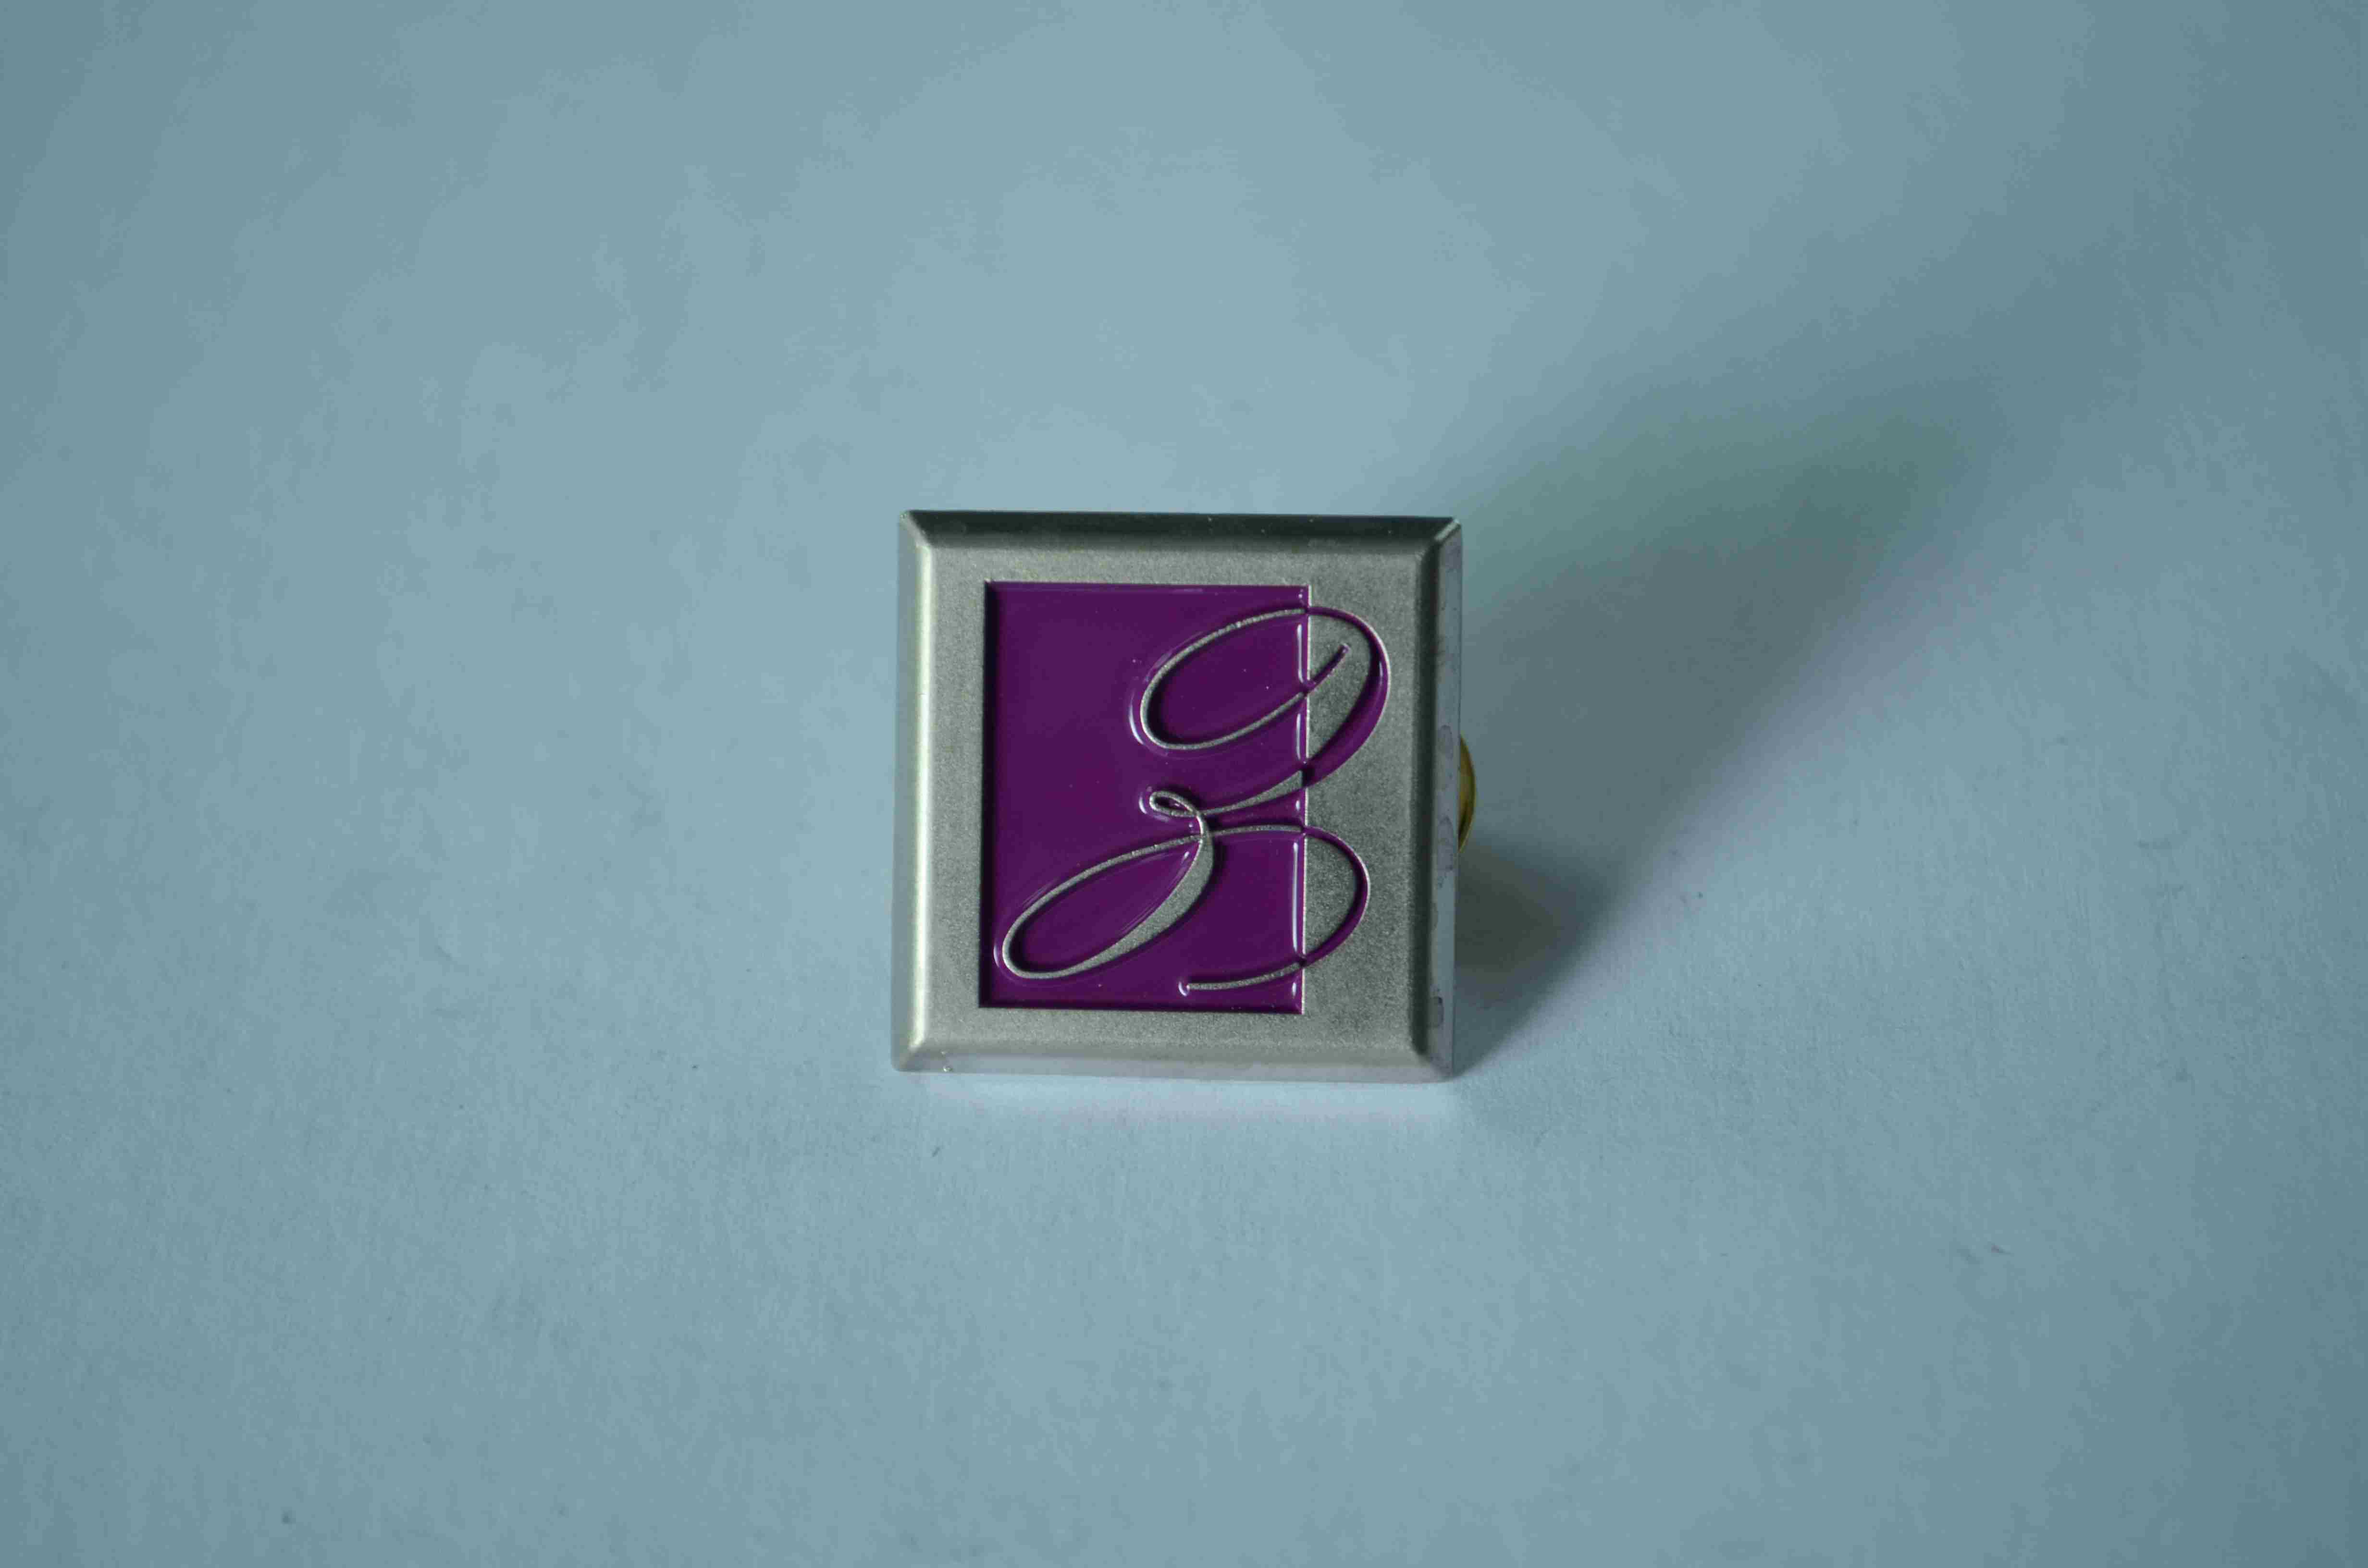 The Aluminum Logo with Pin